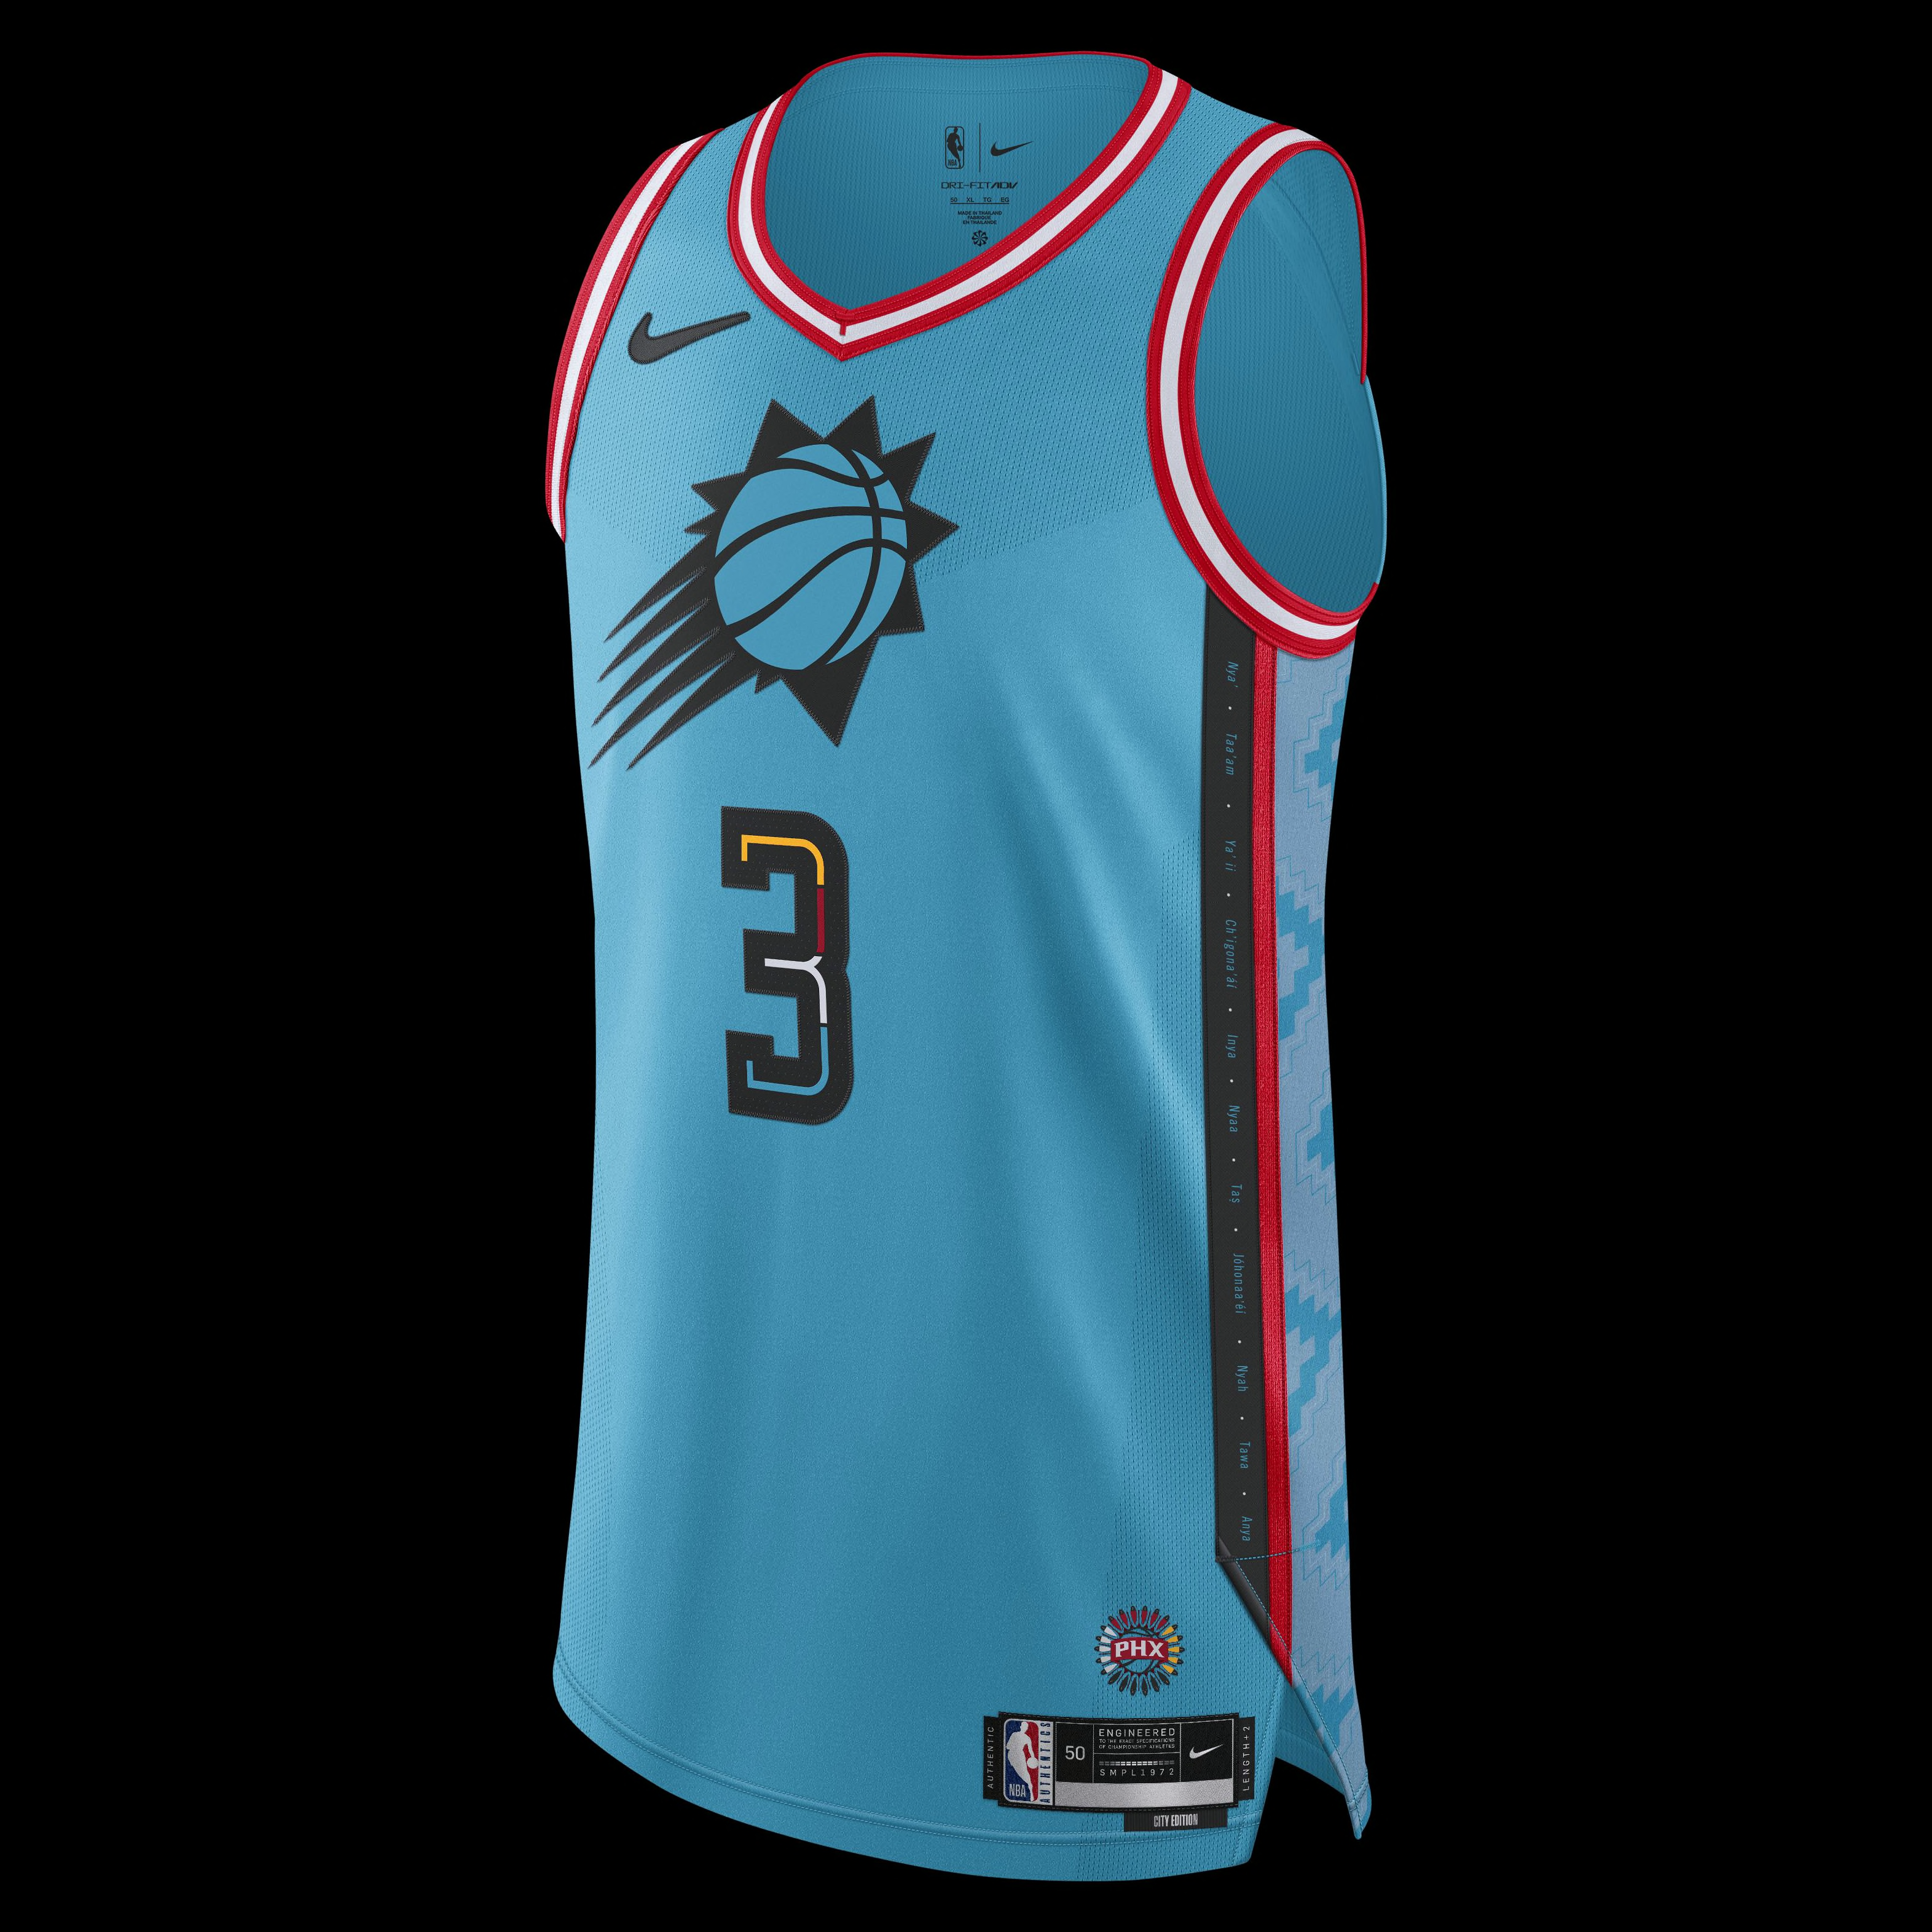 the suns new jersey